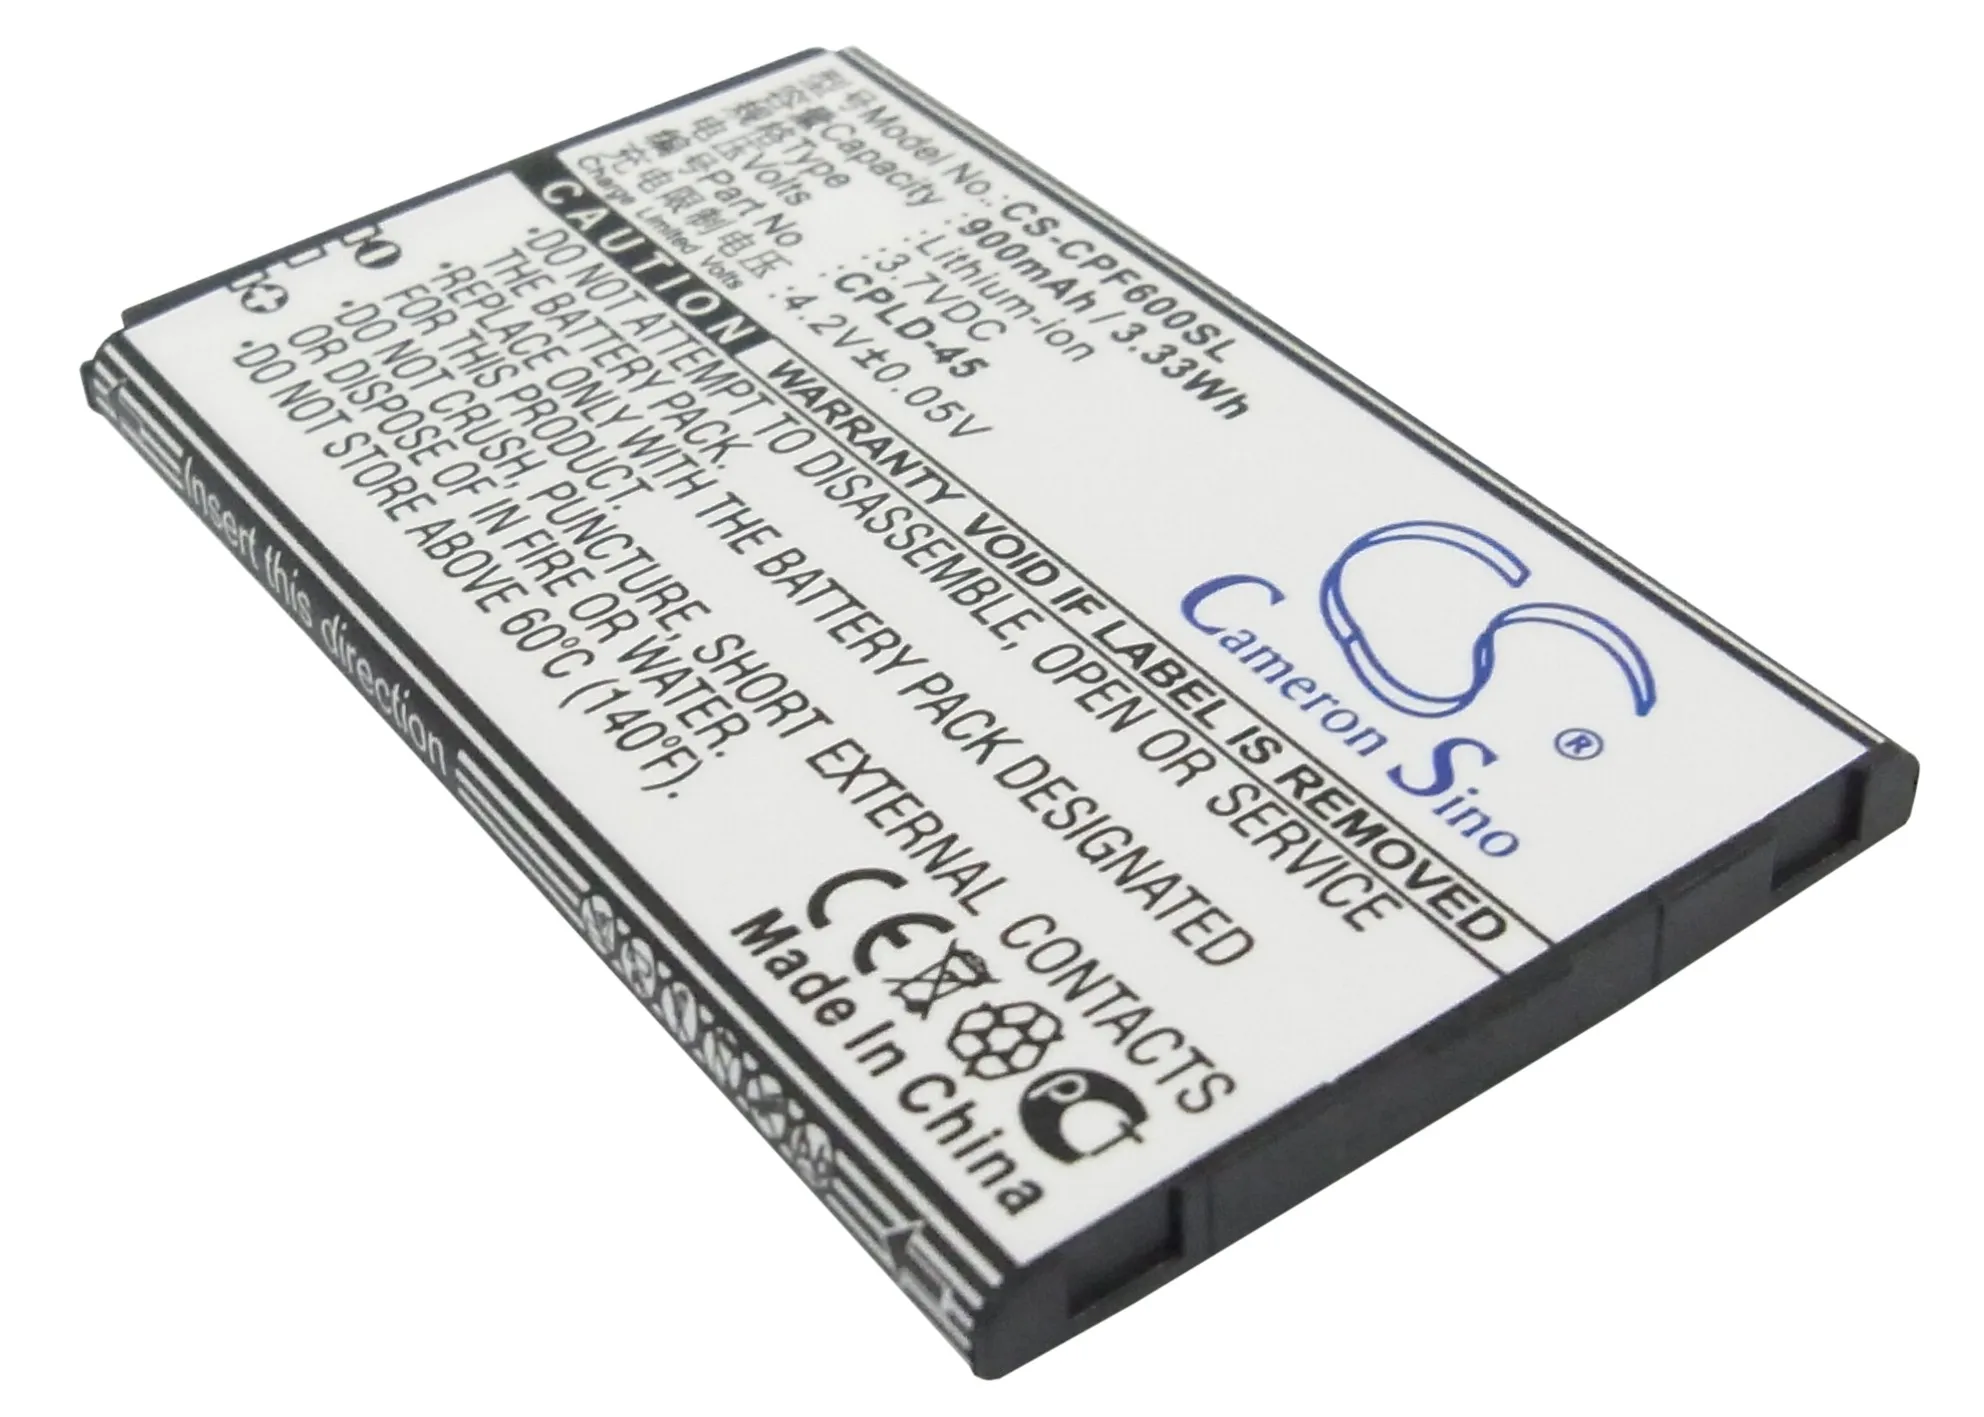 

CS 900mAh / 3.33Wh battery for Coolpad 8830, E506, F600, F618, S180 CPLD-45